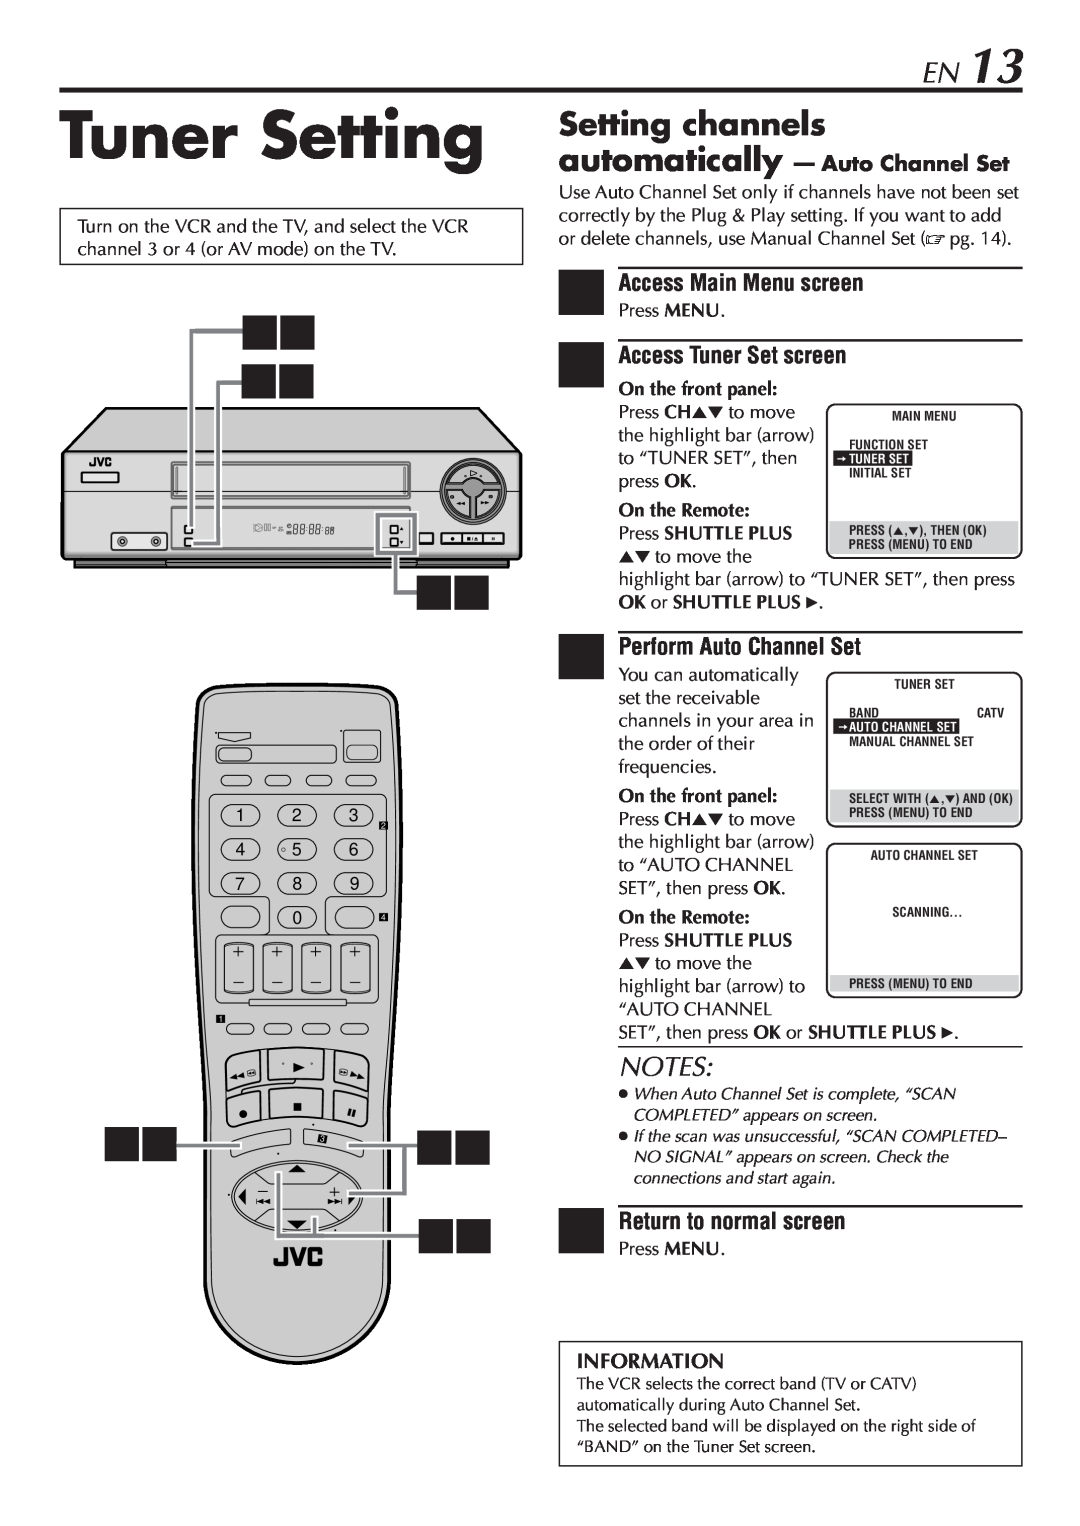 JVC HR-A47U manual Tuner Setting, Setting channels, 2Access Tuner Set screen, Perform Auto Channel Set, 1423 